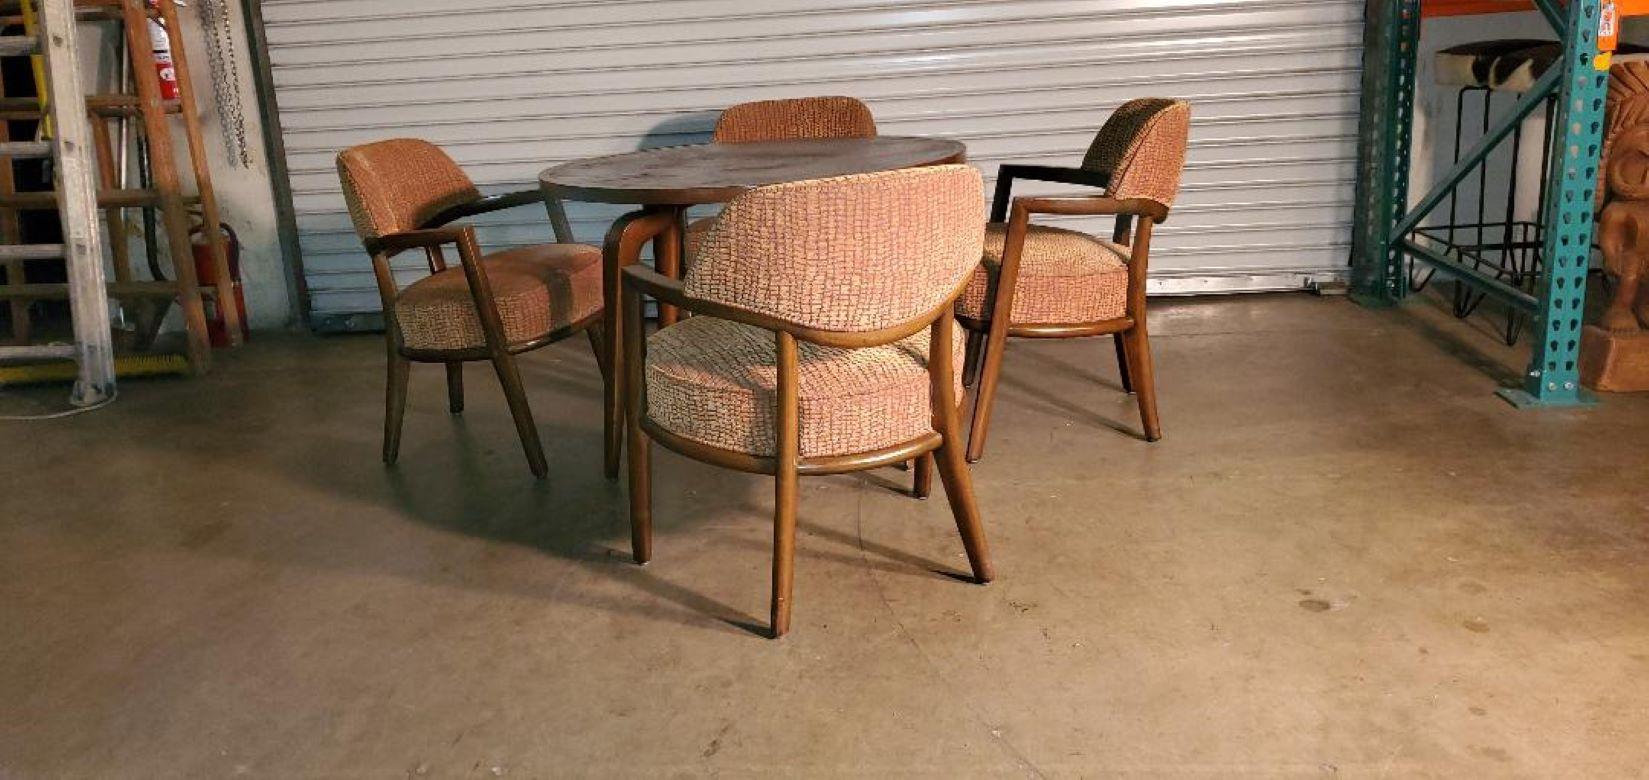 1950s Maurice Bailey Monteverdi Young Card Table And 4 Maurice Bailey Chairs Set.
Maurice Bailey For Monteverdi Young Leather Top Card Table and 4 Upholstered Chairs.
Leather Top Has Some Wear And Use Throughout The Years Of Gin Rummy.
Original